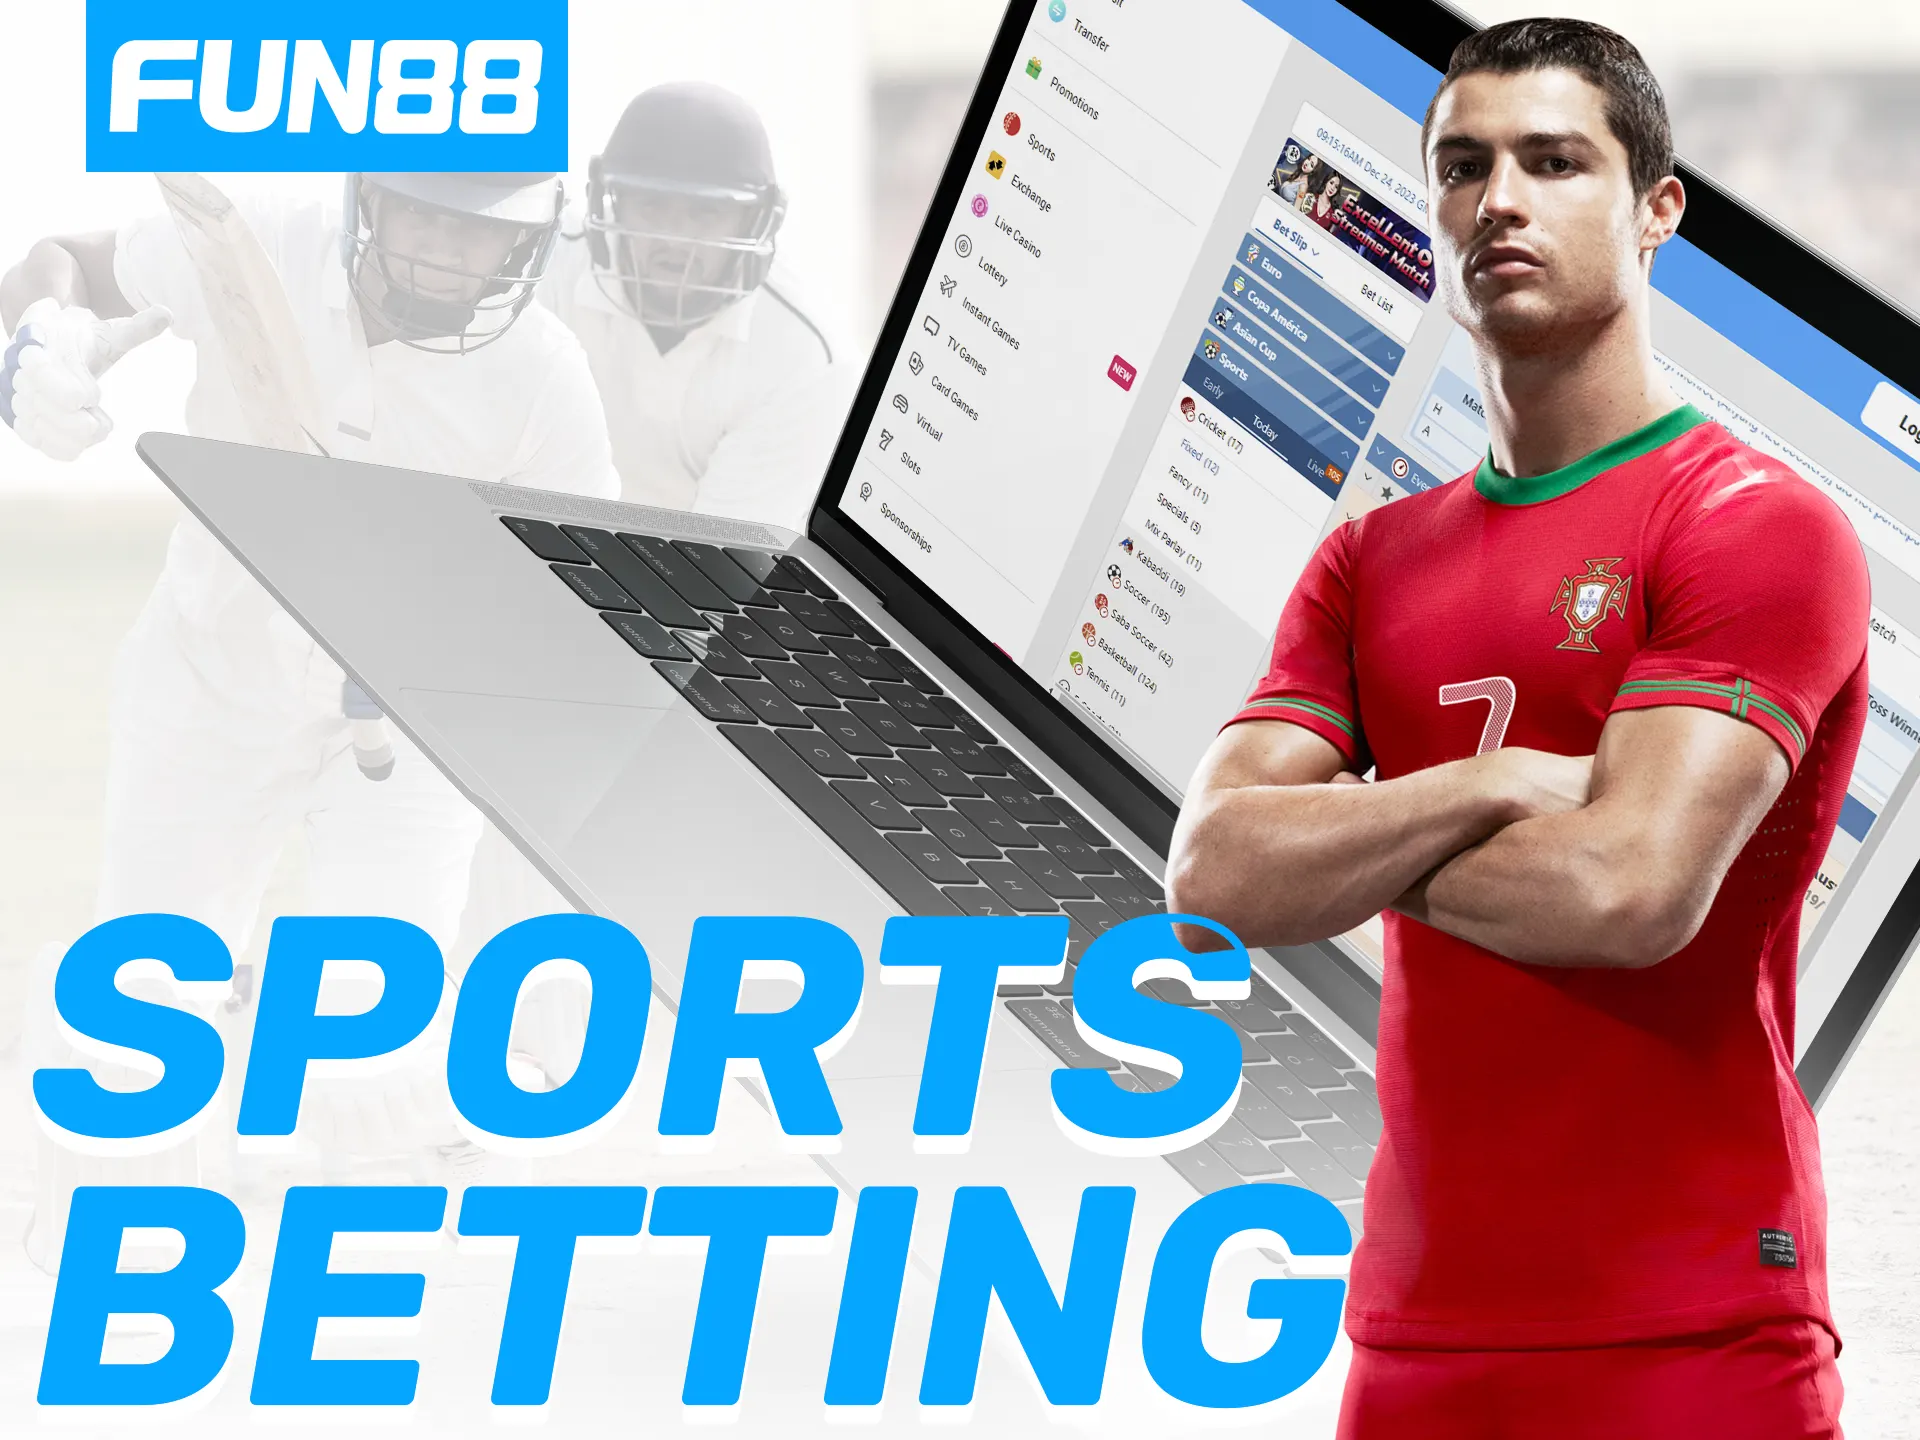 Fun88 offers diverse sports betting options, including football, volleyball, cricket etc.